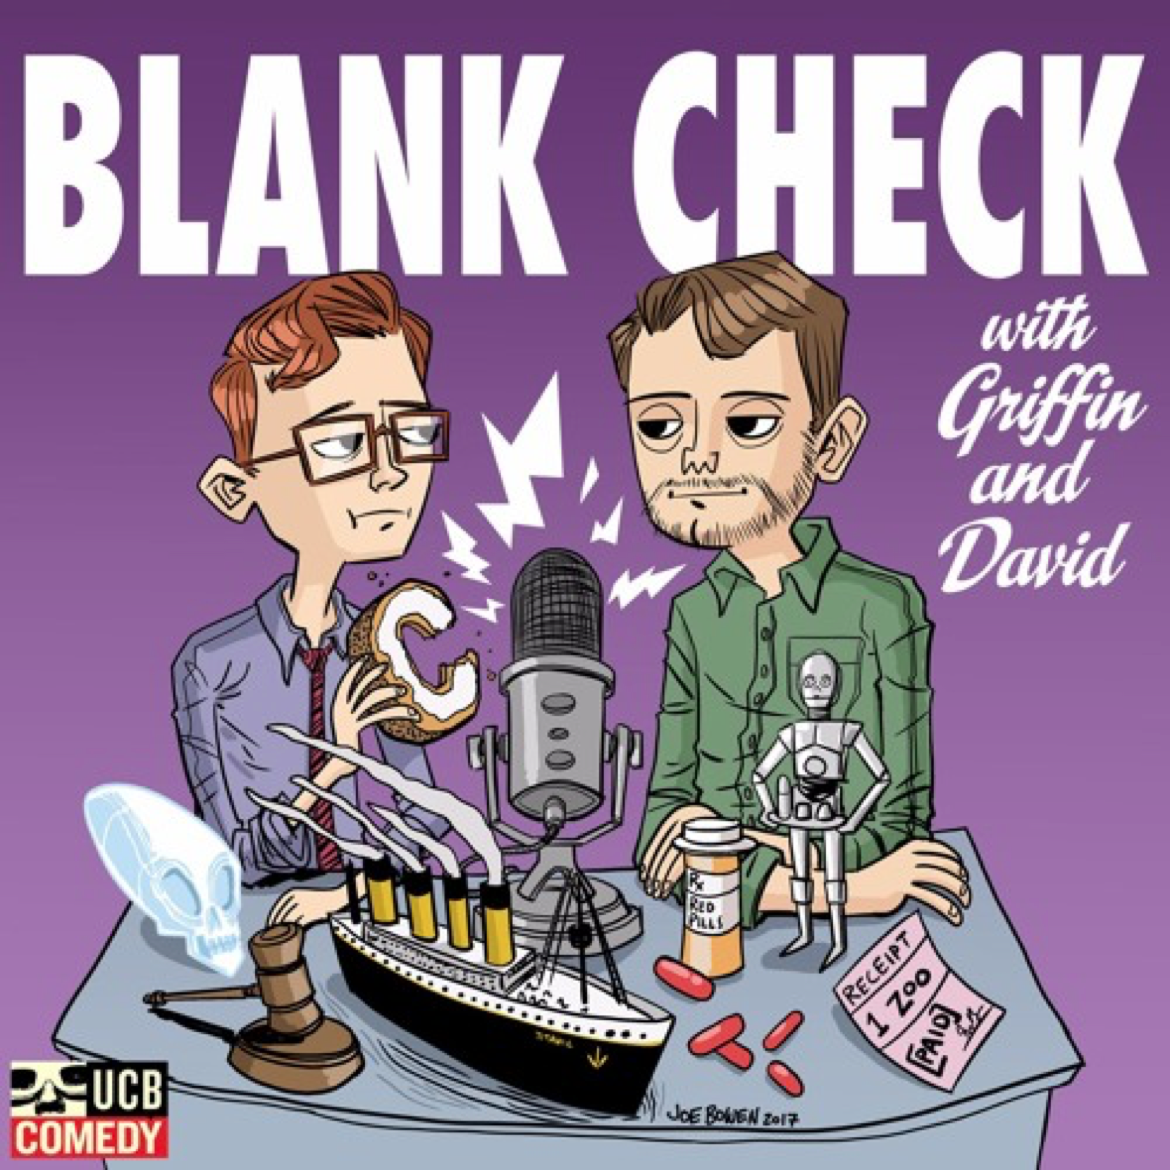 Podcast of the Week Blank Check